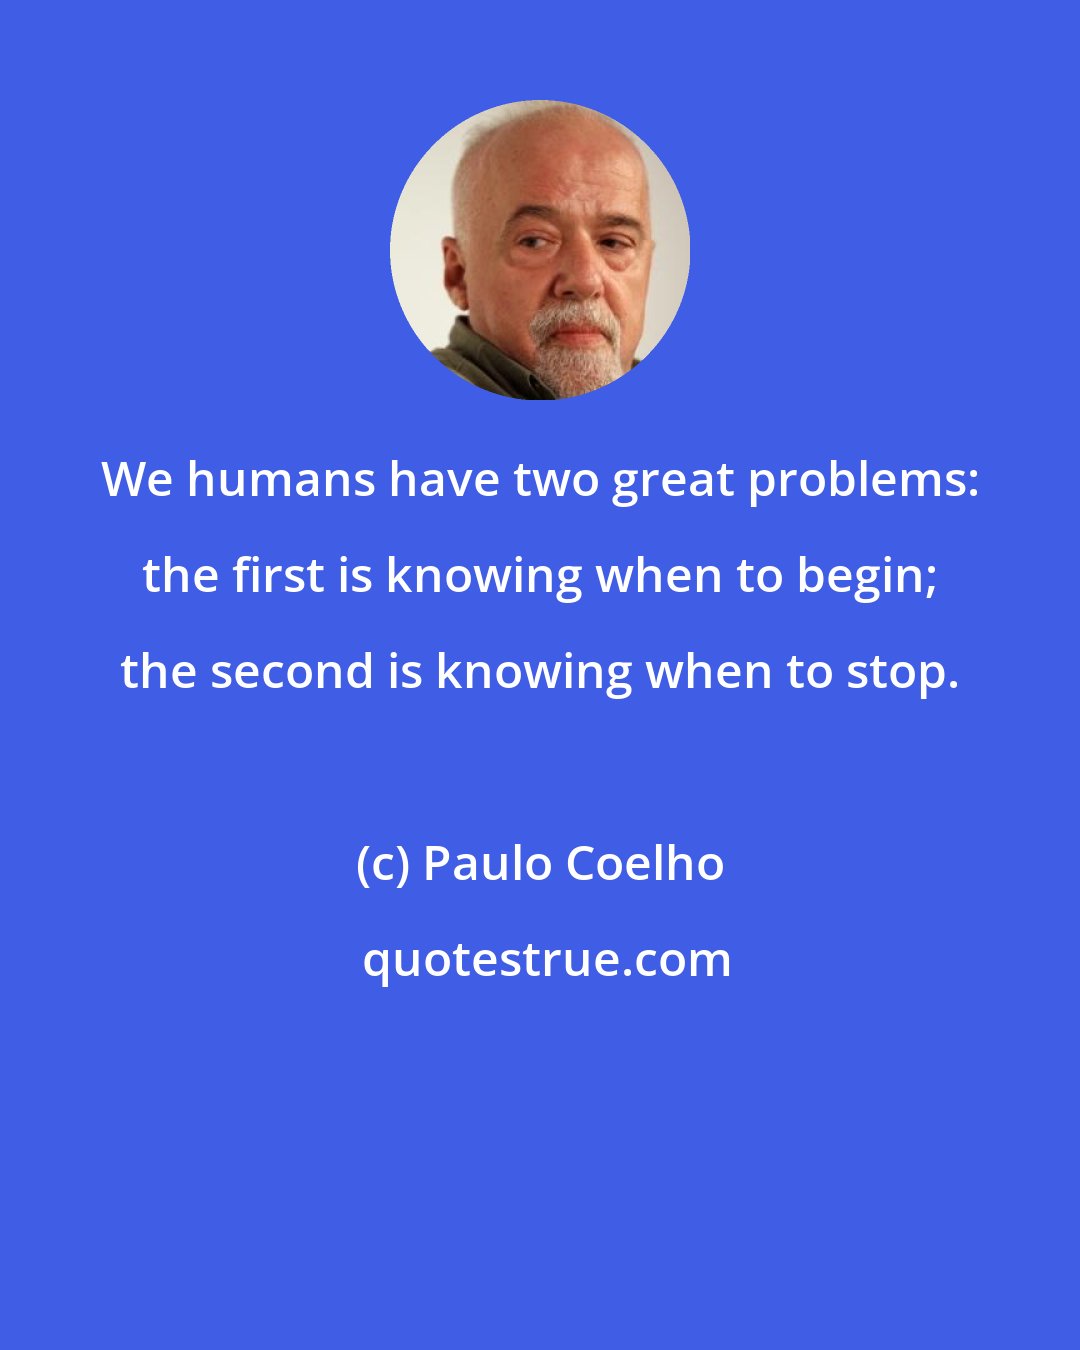 Paulo Coelho: We humans have two great problems: the first is knowing when to begin; the second is knowing when to stop.